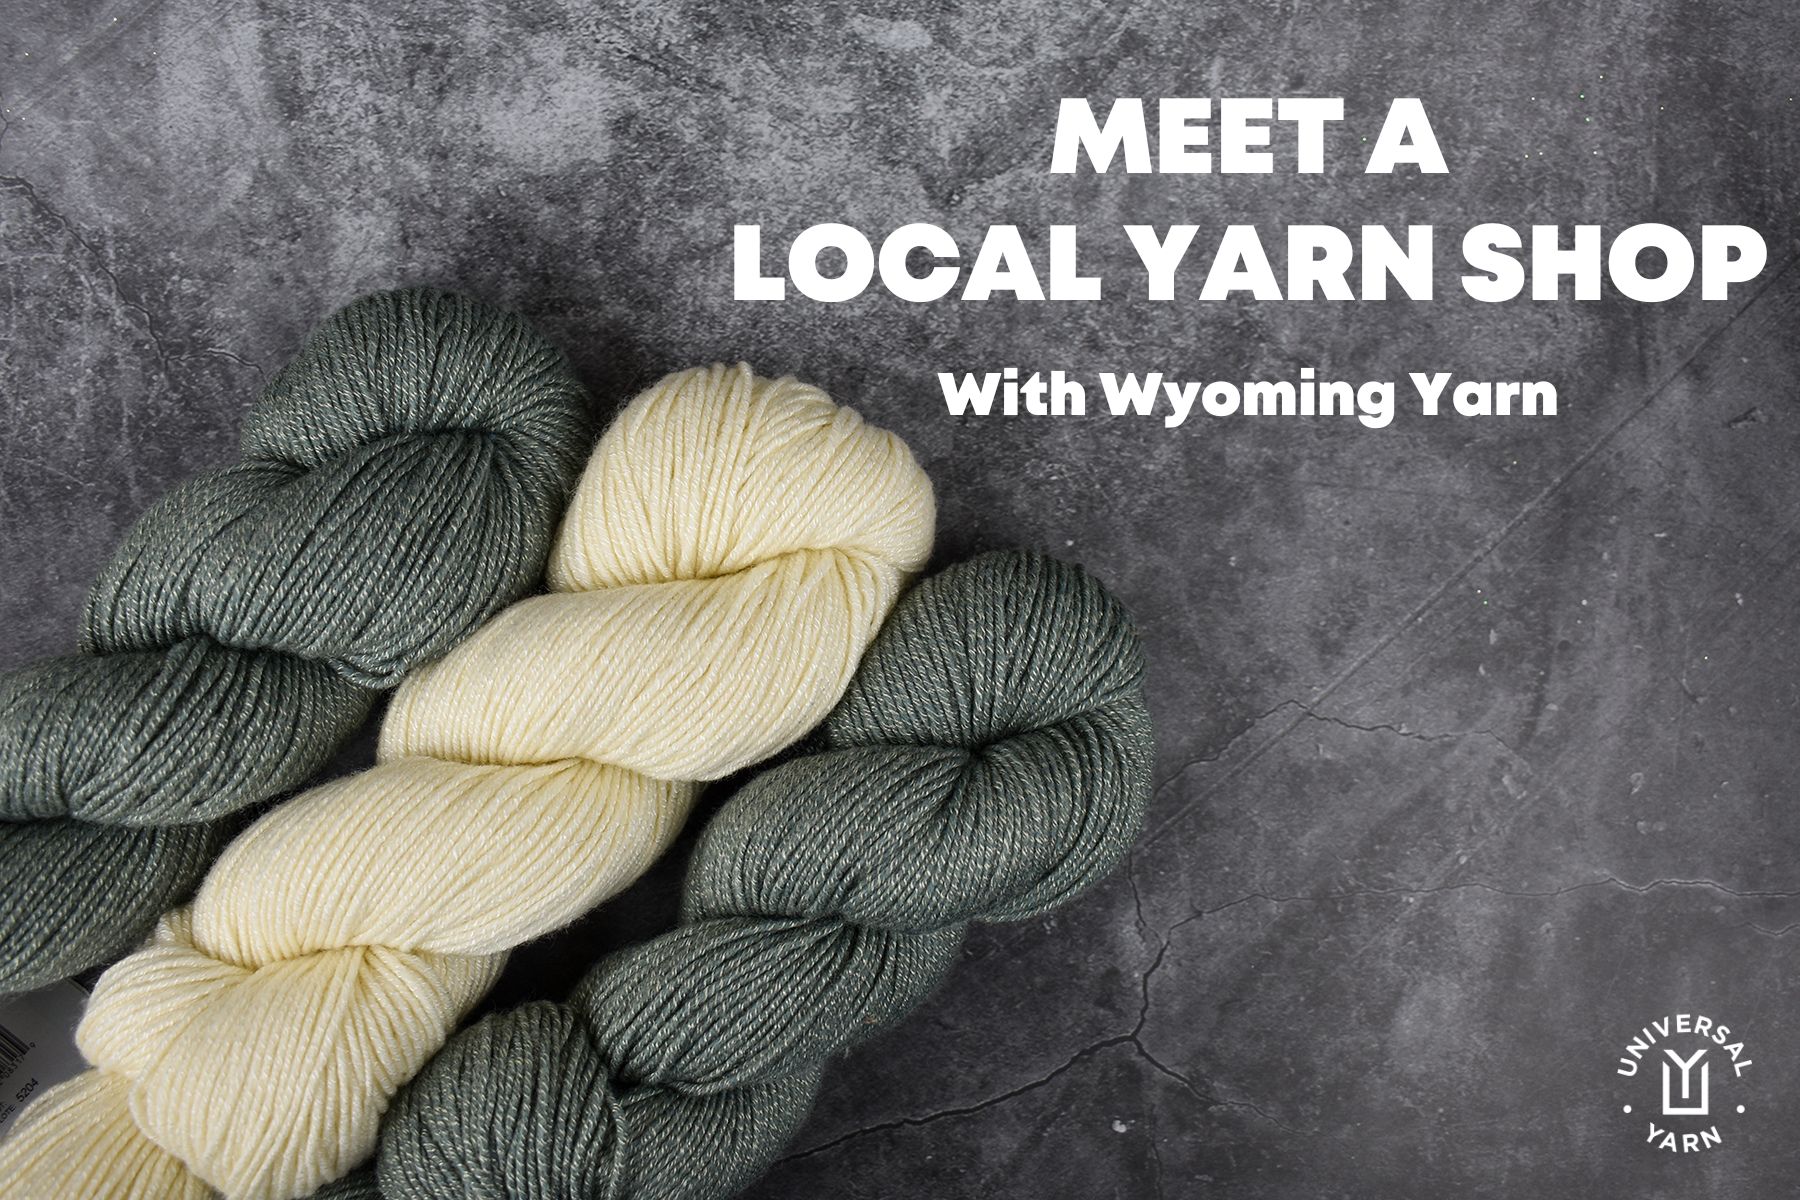 Meet a Local Yarn Shop with Wyoming Yarn - three hanks of Wool Pop with a black marble background